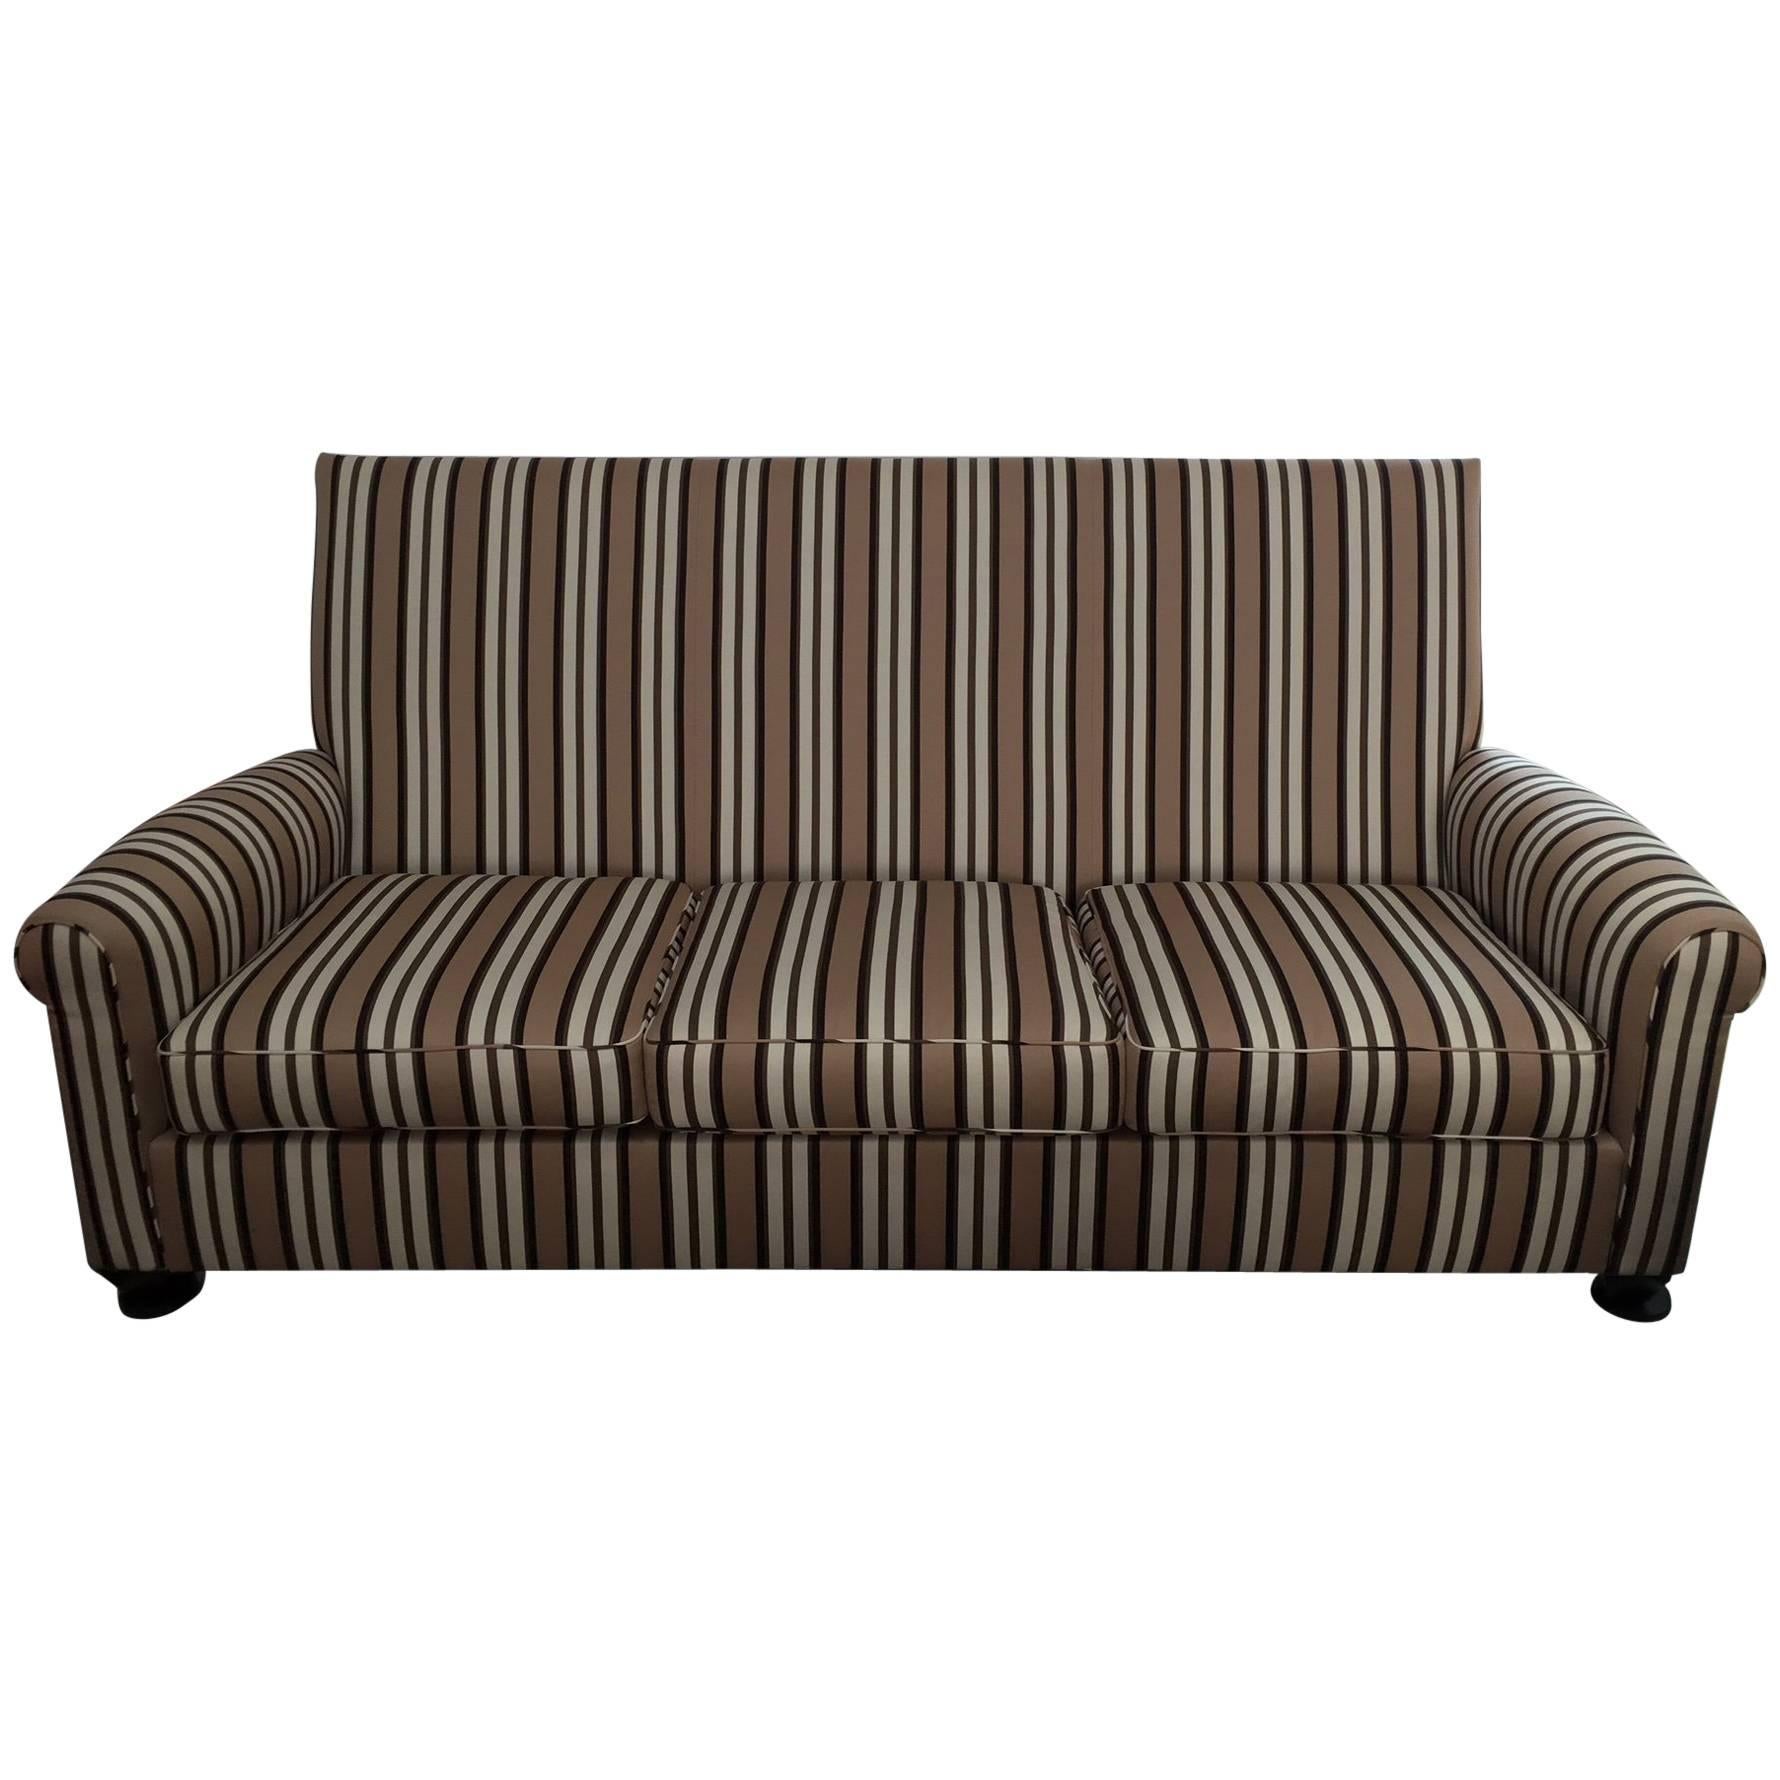 Donghia St. James Striped Sofa For Sale